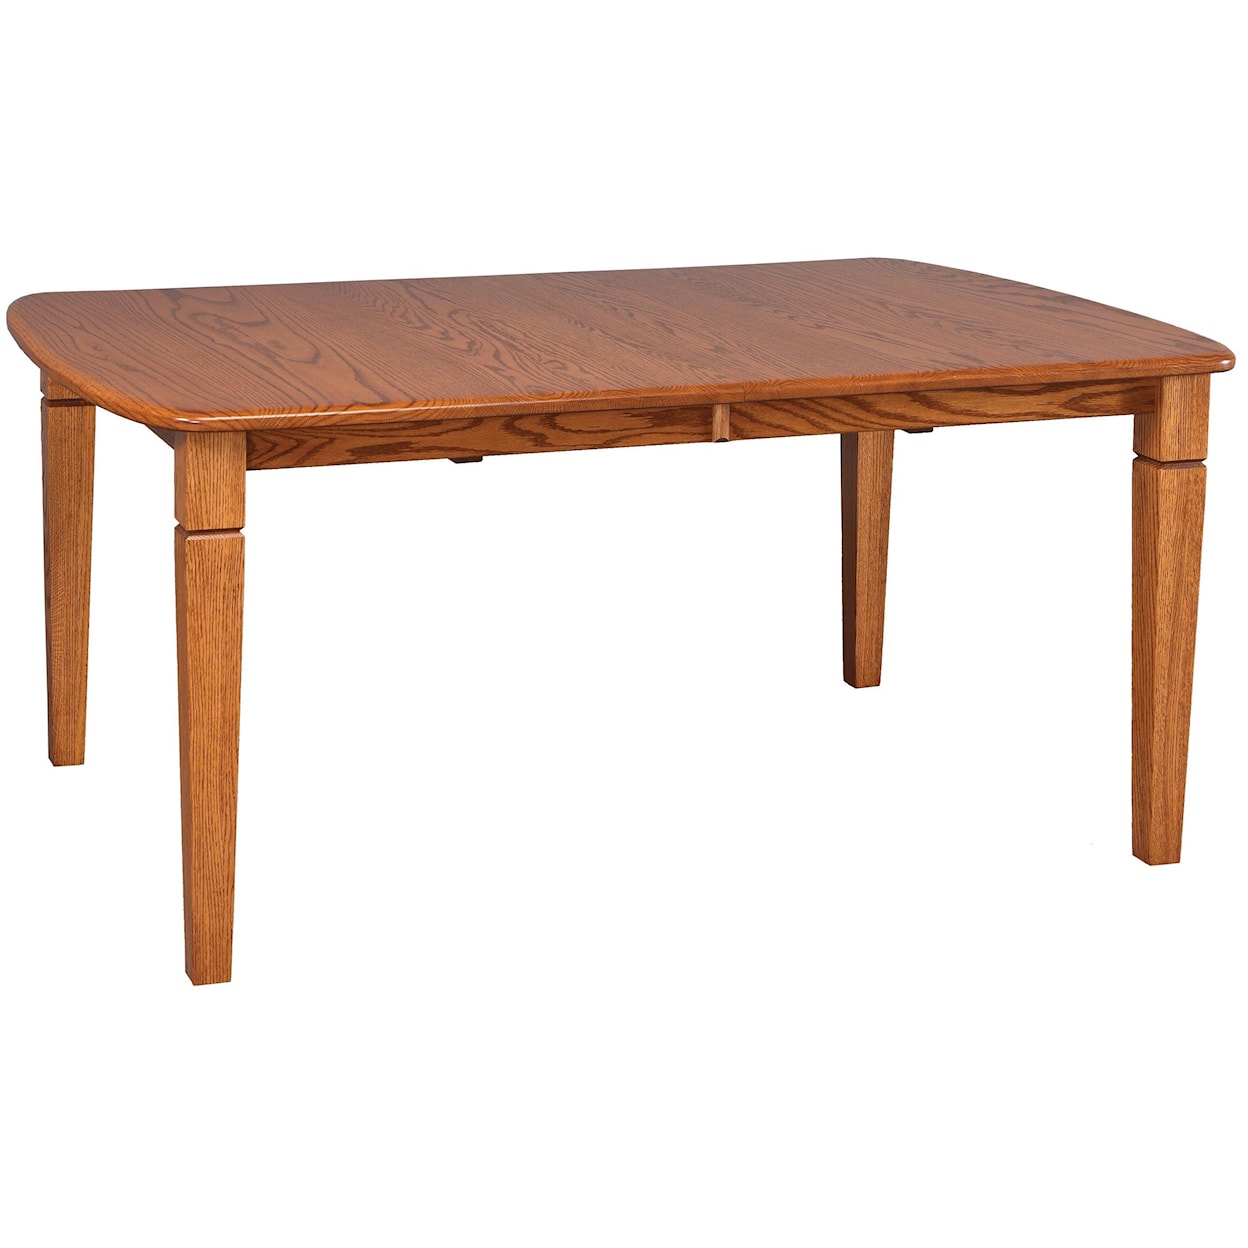 Daniel's Amish Tables 42" Solid Wood Table